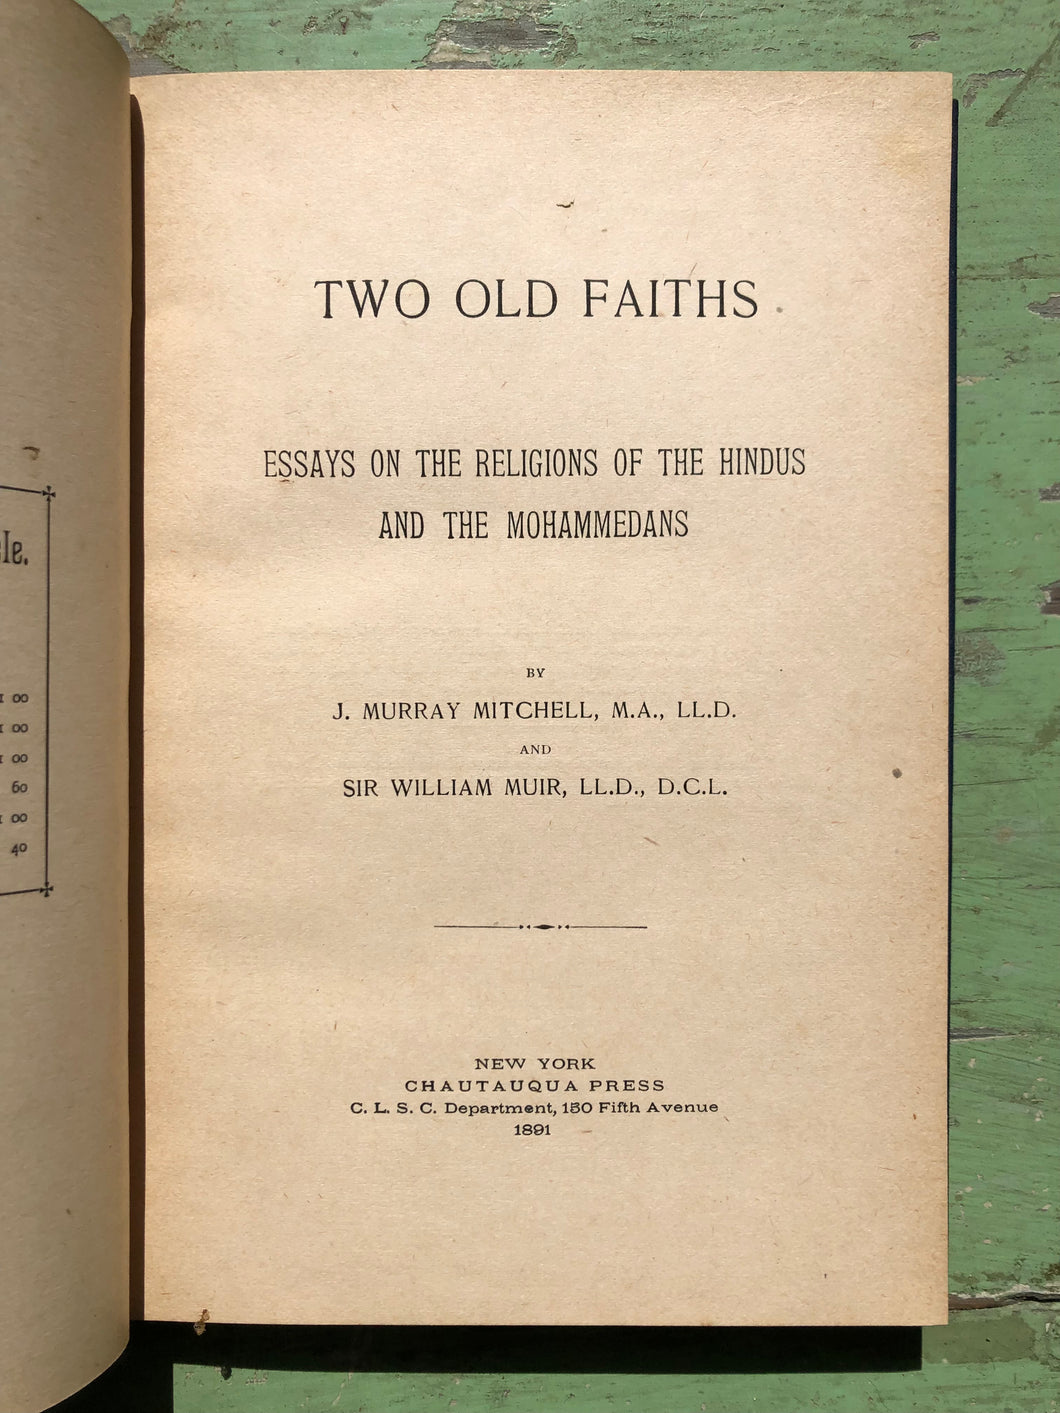 Two Old Faiths: Essays on the Religions of the Hindus and the Mohammedans. by J. Murray Mitchell and Sir William Muir